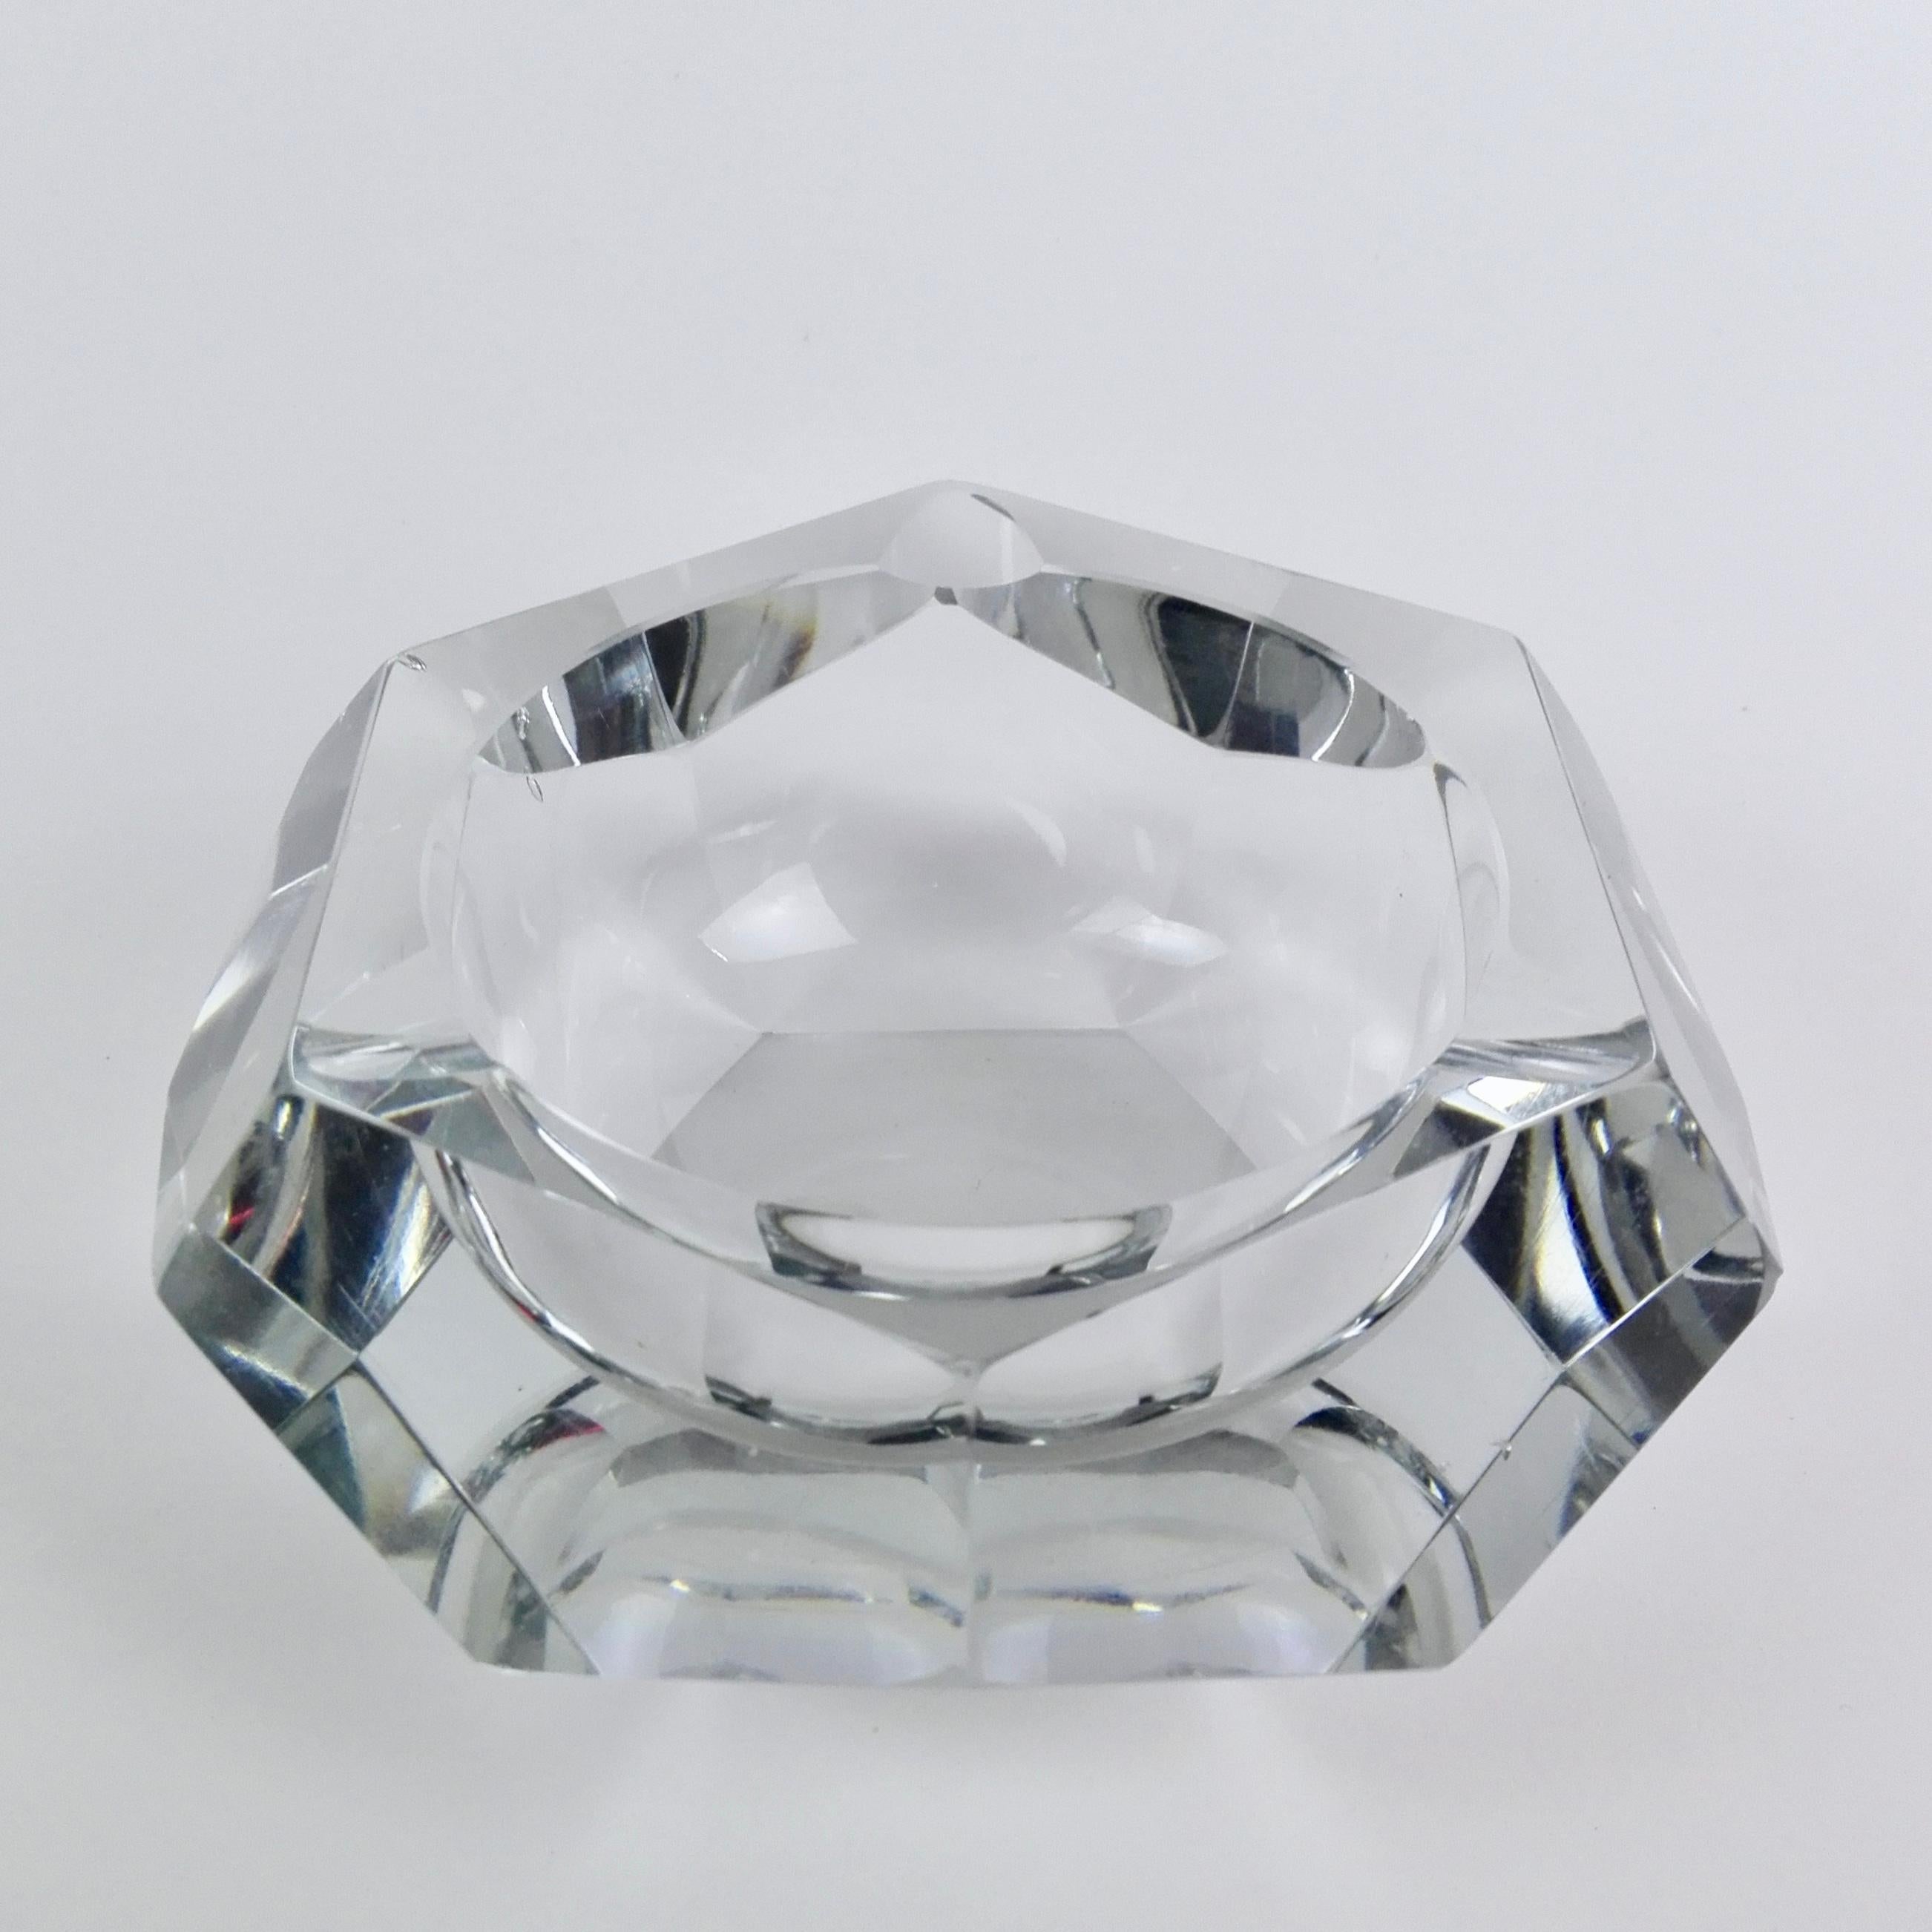 Beautiful Italian 1960's ashtray with faceted shaped cut sides that widen from a hexagonal base, reflecting light in a stunning way.
A vintage ashtray is always a must in quality, durability and design.
This beautiful creation with its